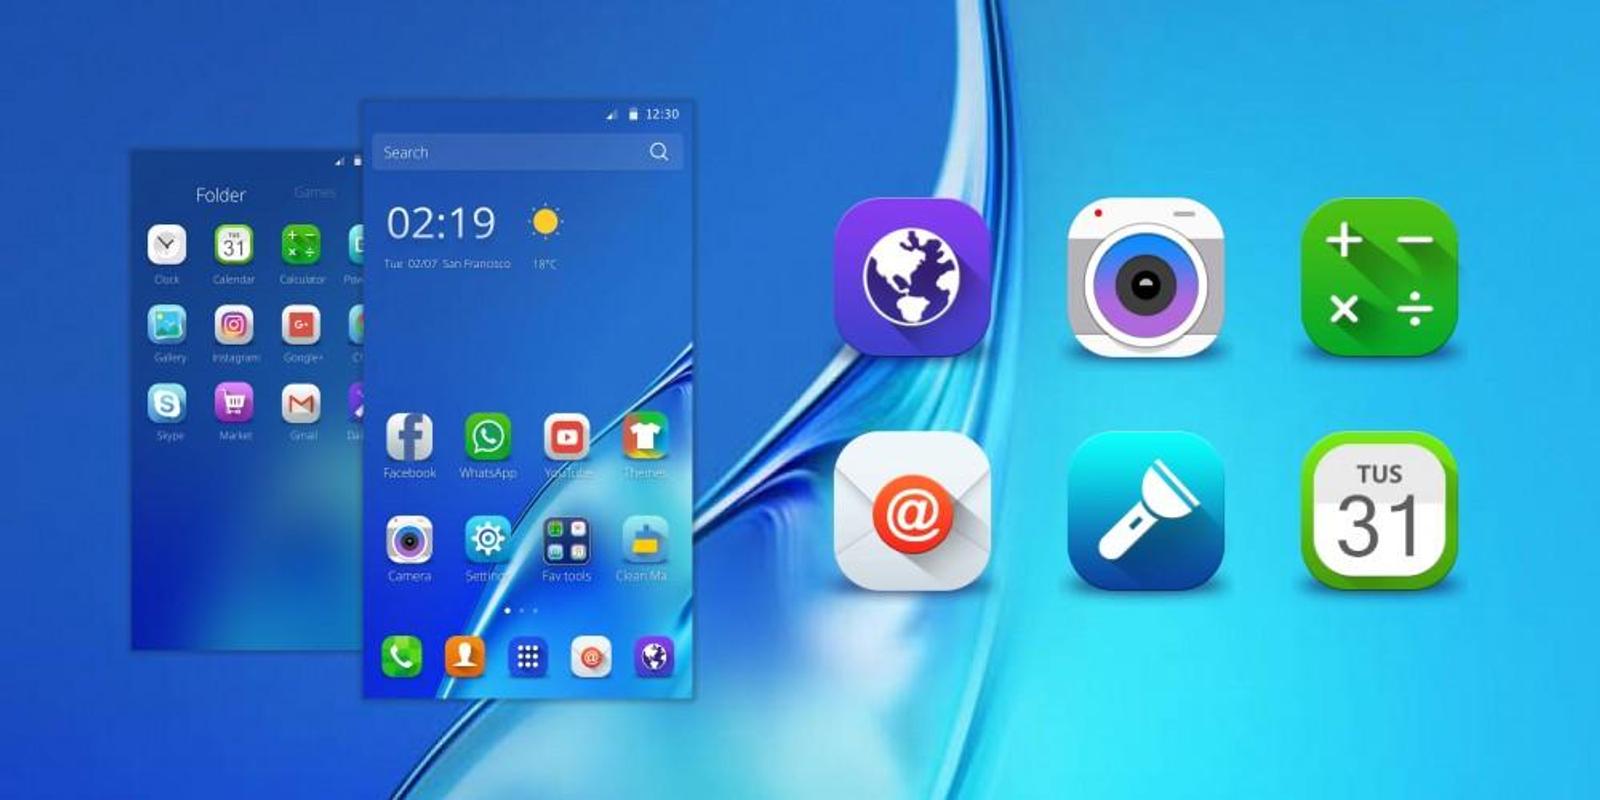 Free download themes for samsung android phones help